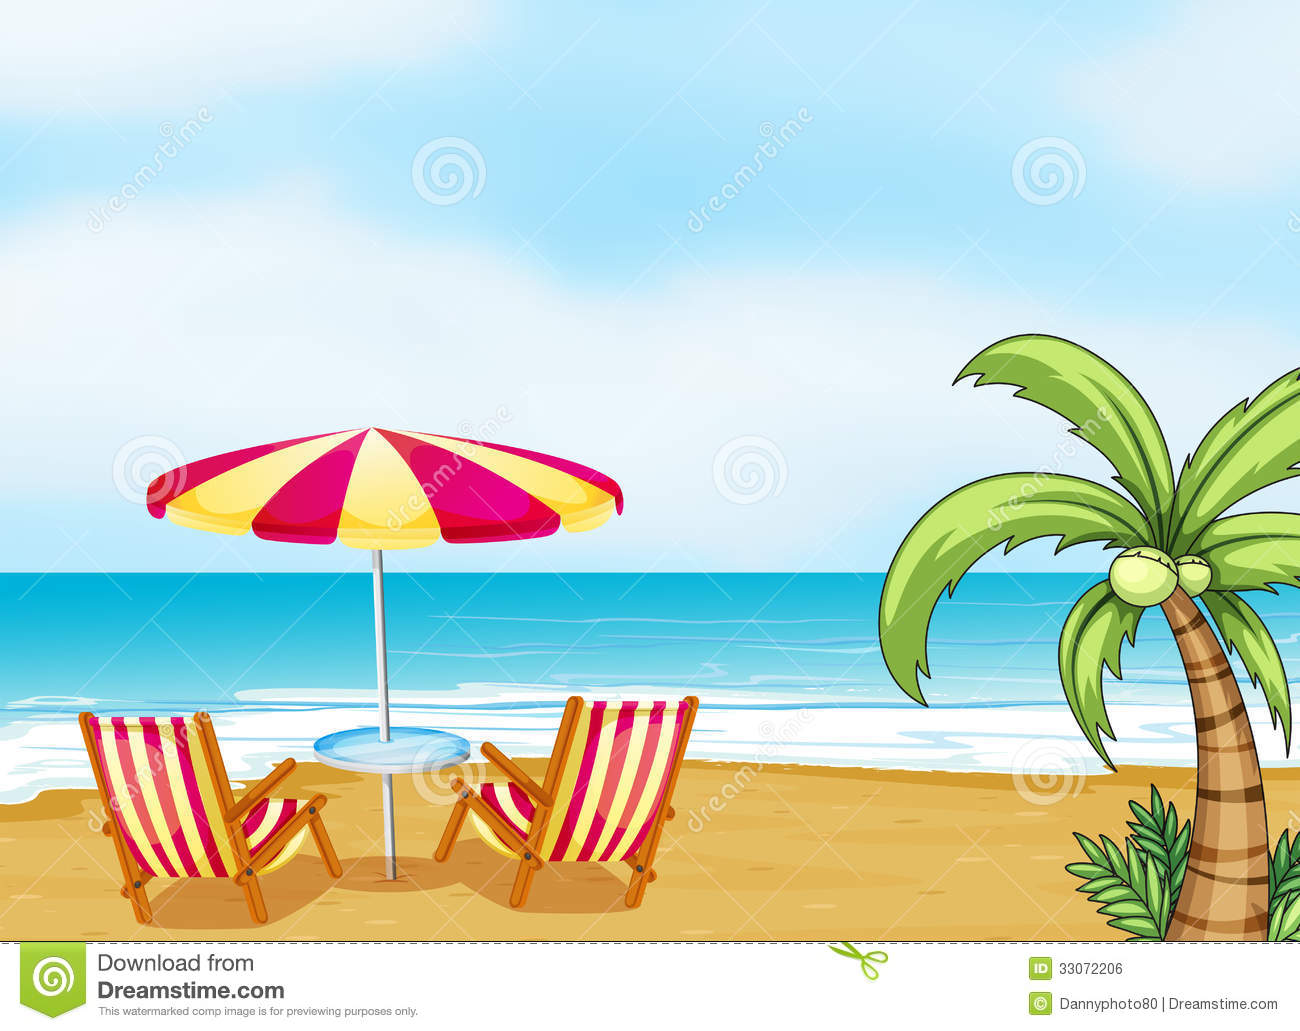 The Beach With An Umbrella And Chairs Royalty Free Stock Image   Image